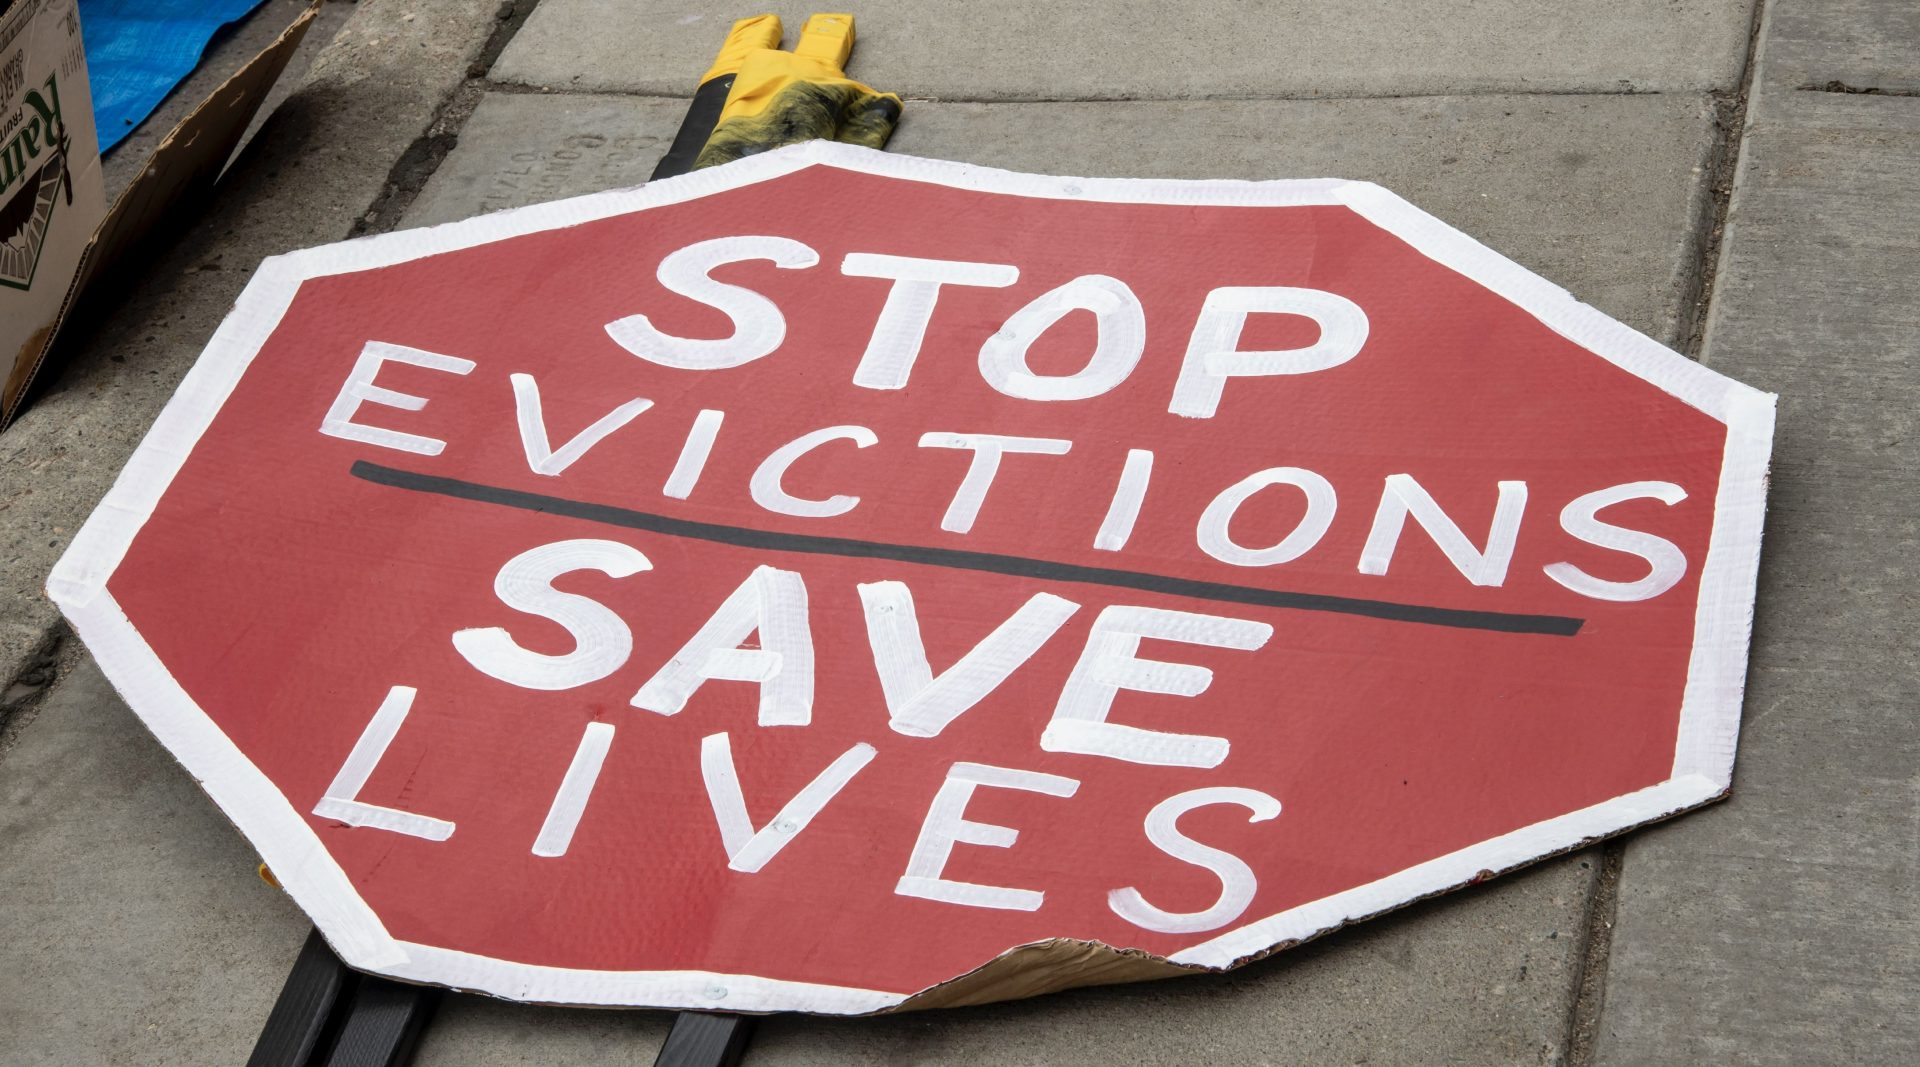 (WATCH) Activists Physically Protect Detroit Resident With Stage-Five Kidney Disease From Eviction